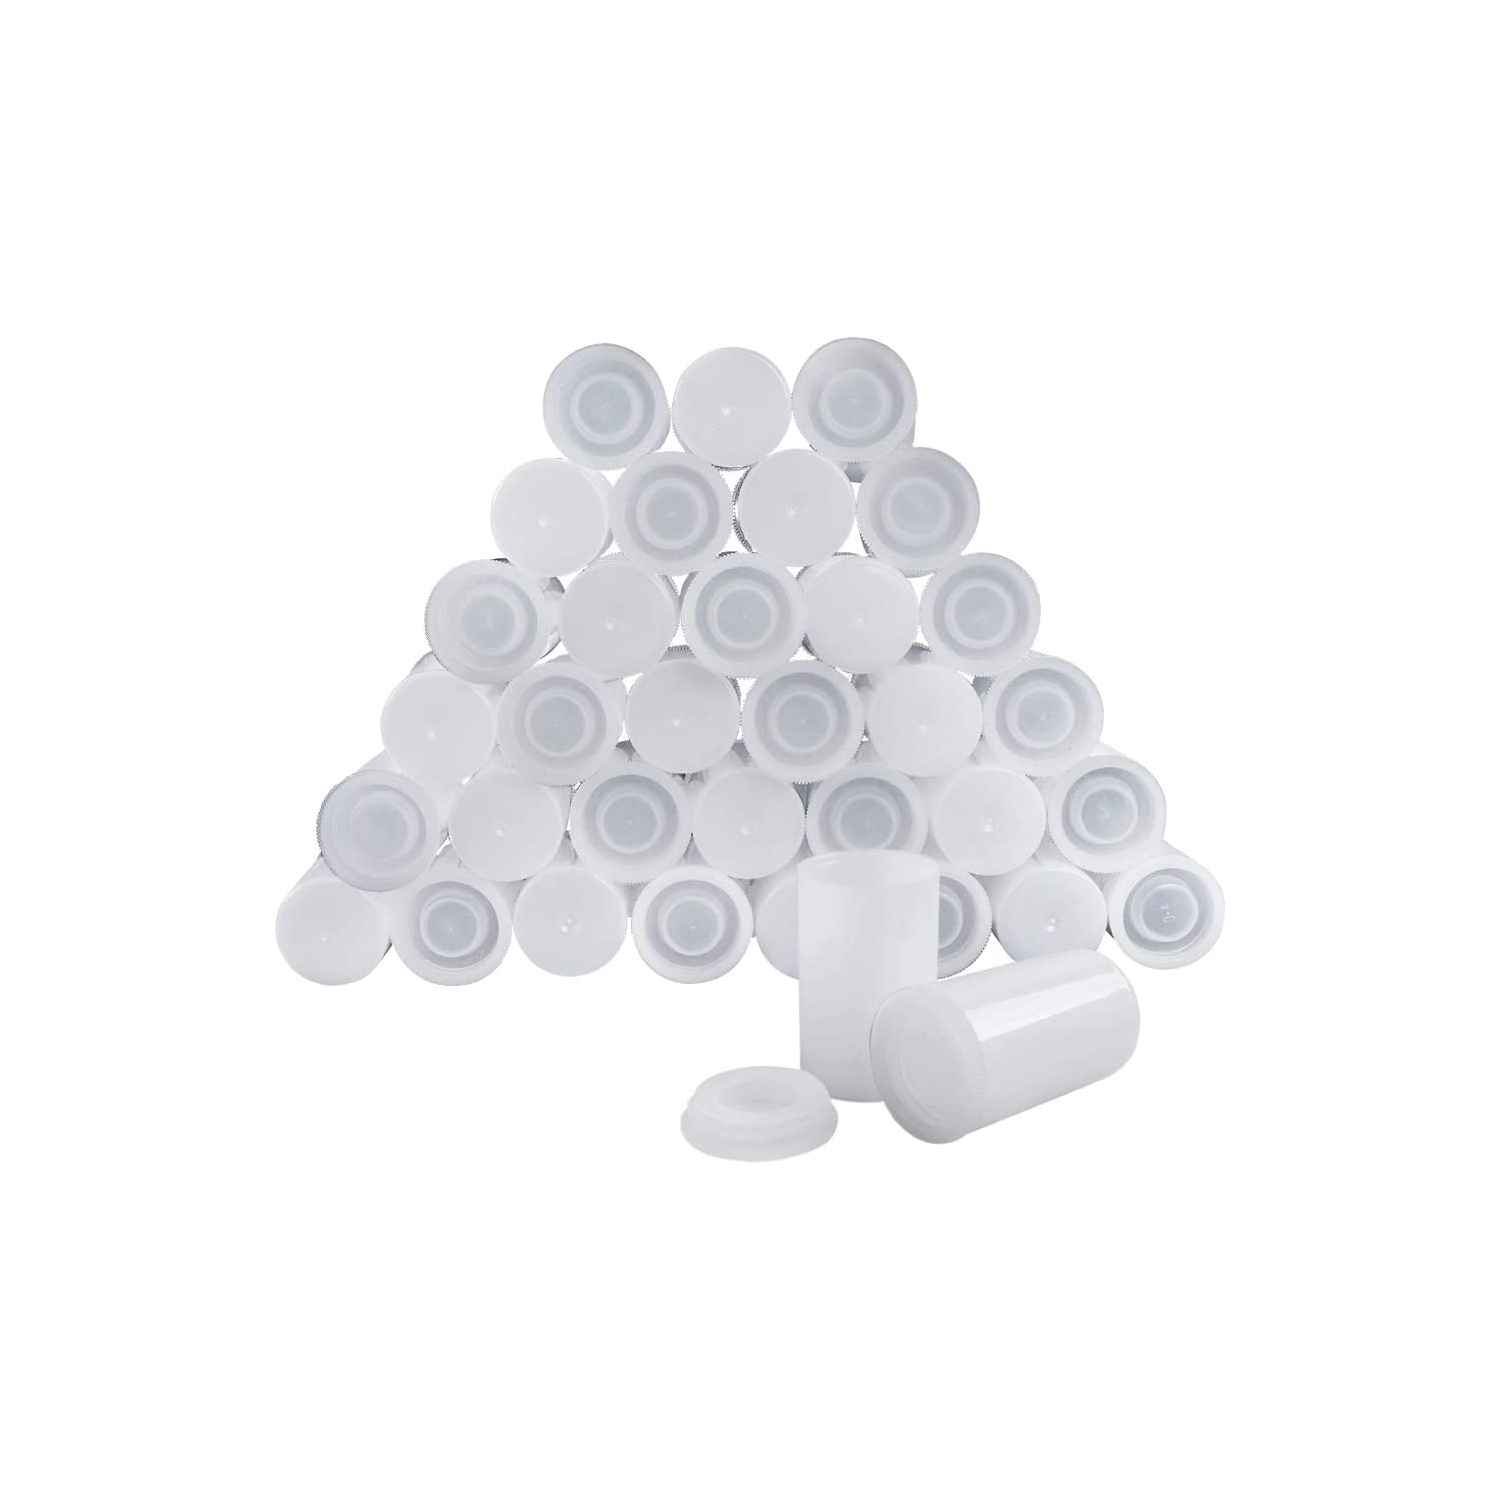 35mm Film Canisters with Caps (35 Pack) Plastic White Empty Film Canister Case  Bulk with Lids Storage Reel Containers for Storing Film, Small Accessories,  Beads